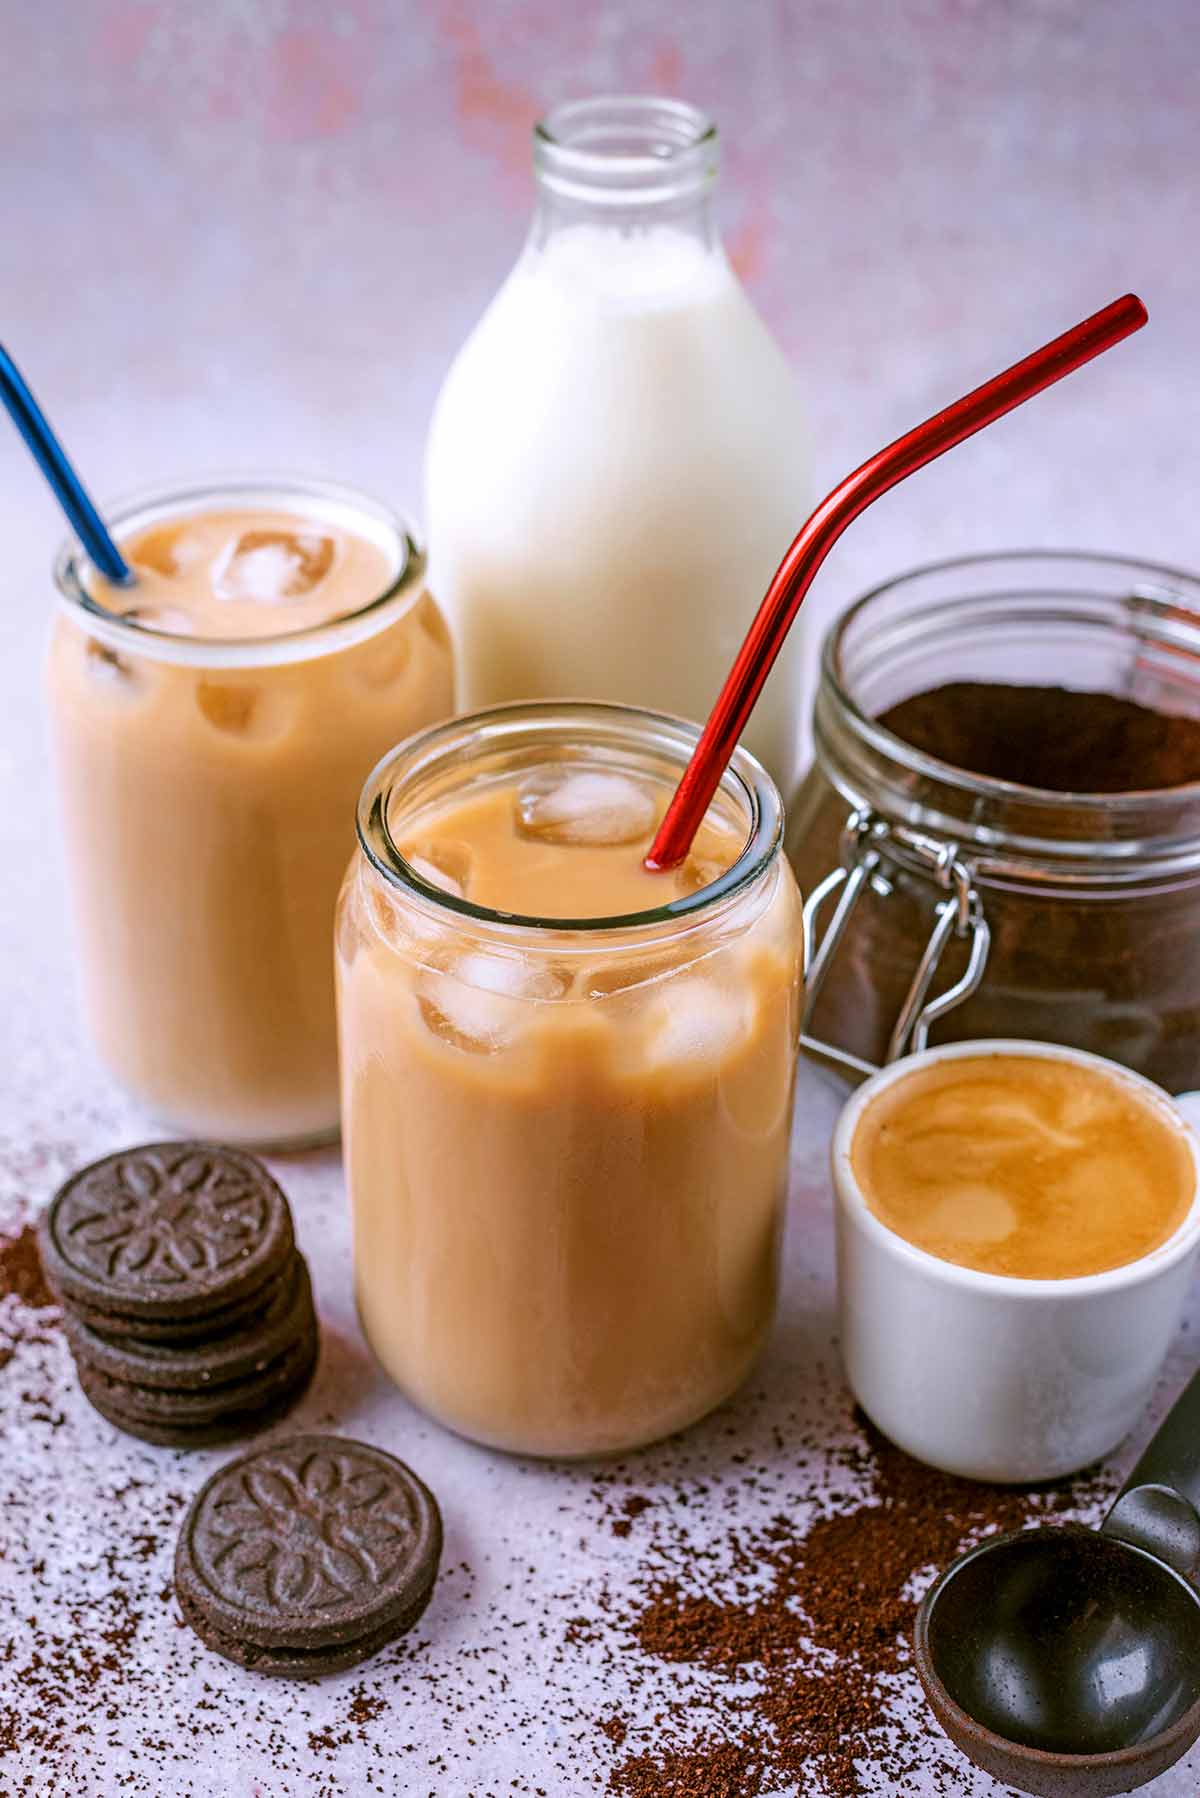 Iced coffee in two glasses in front of a bottle of milk and jar of coffee grounds.